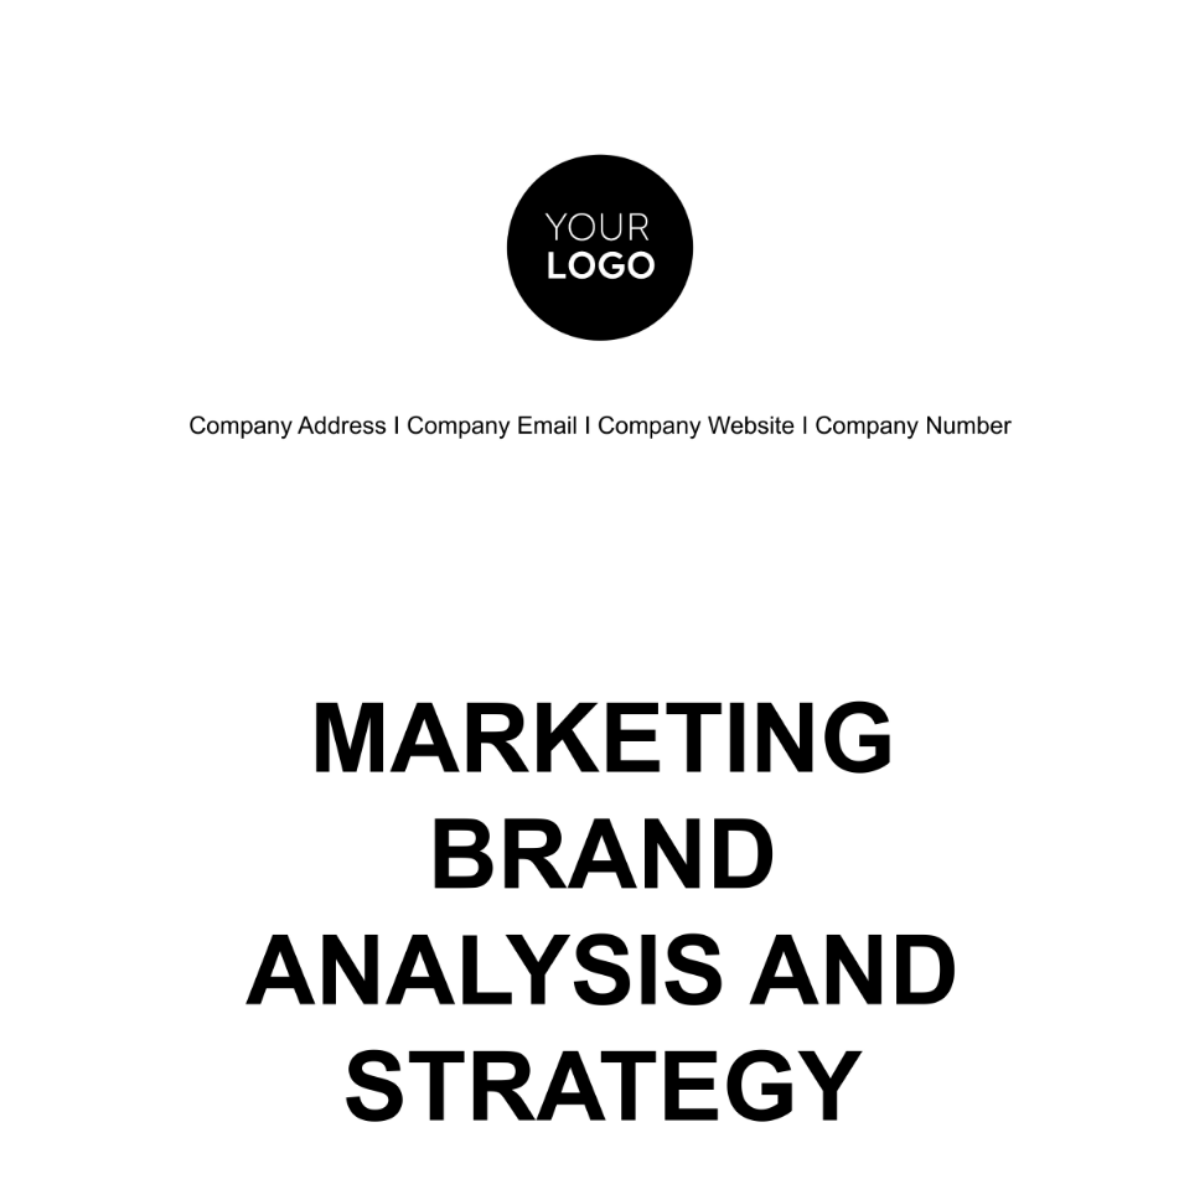 Marketing Brand Analysis and Strategy Template